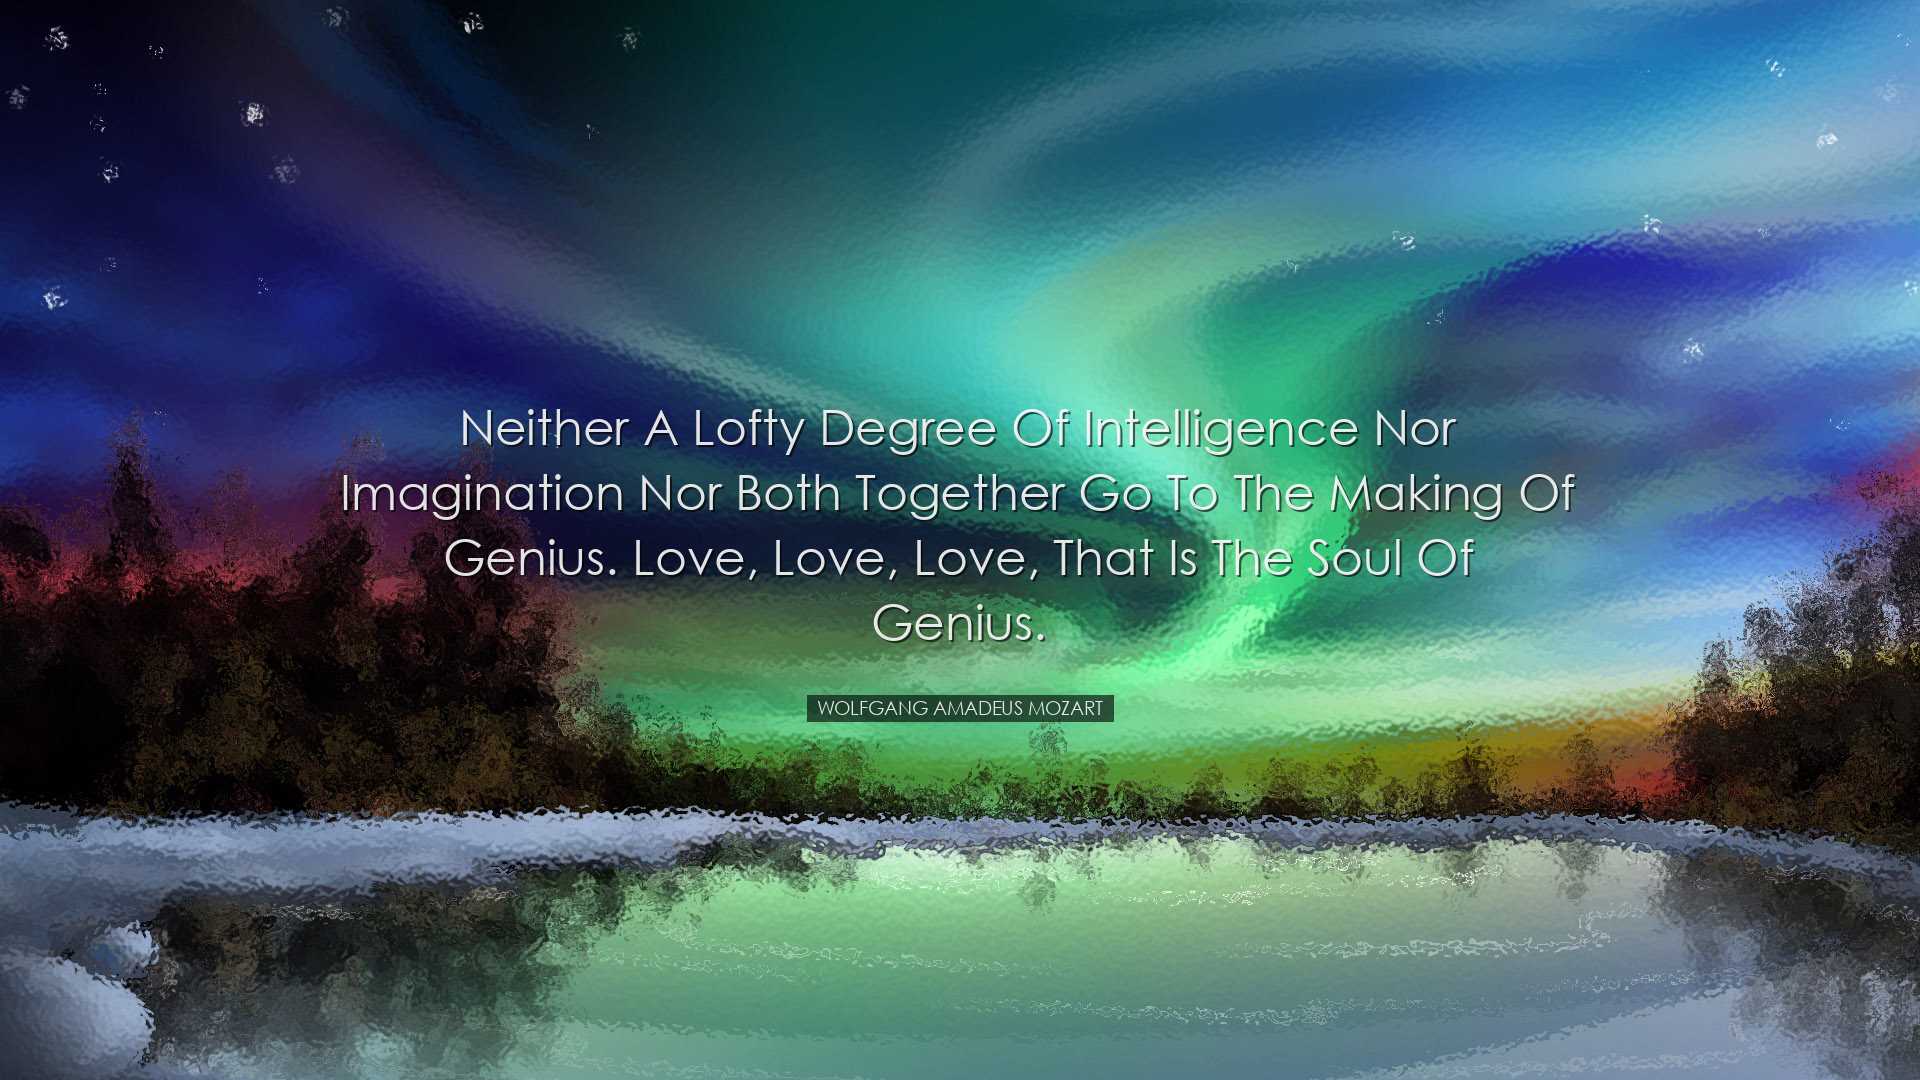 Neither a lofty degree of intelligence nor imagination nor both to